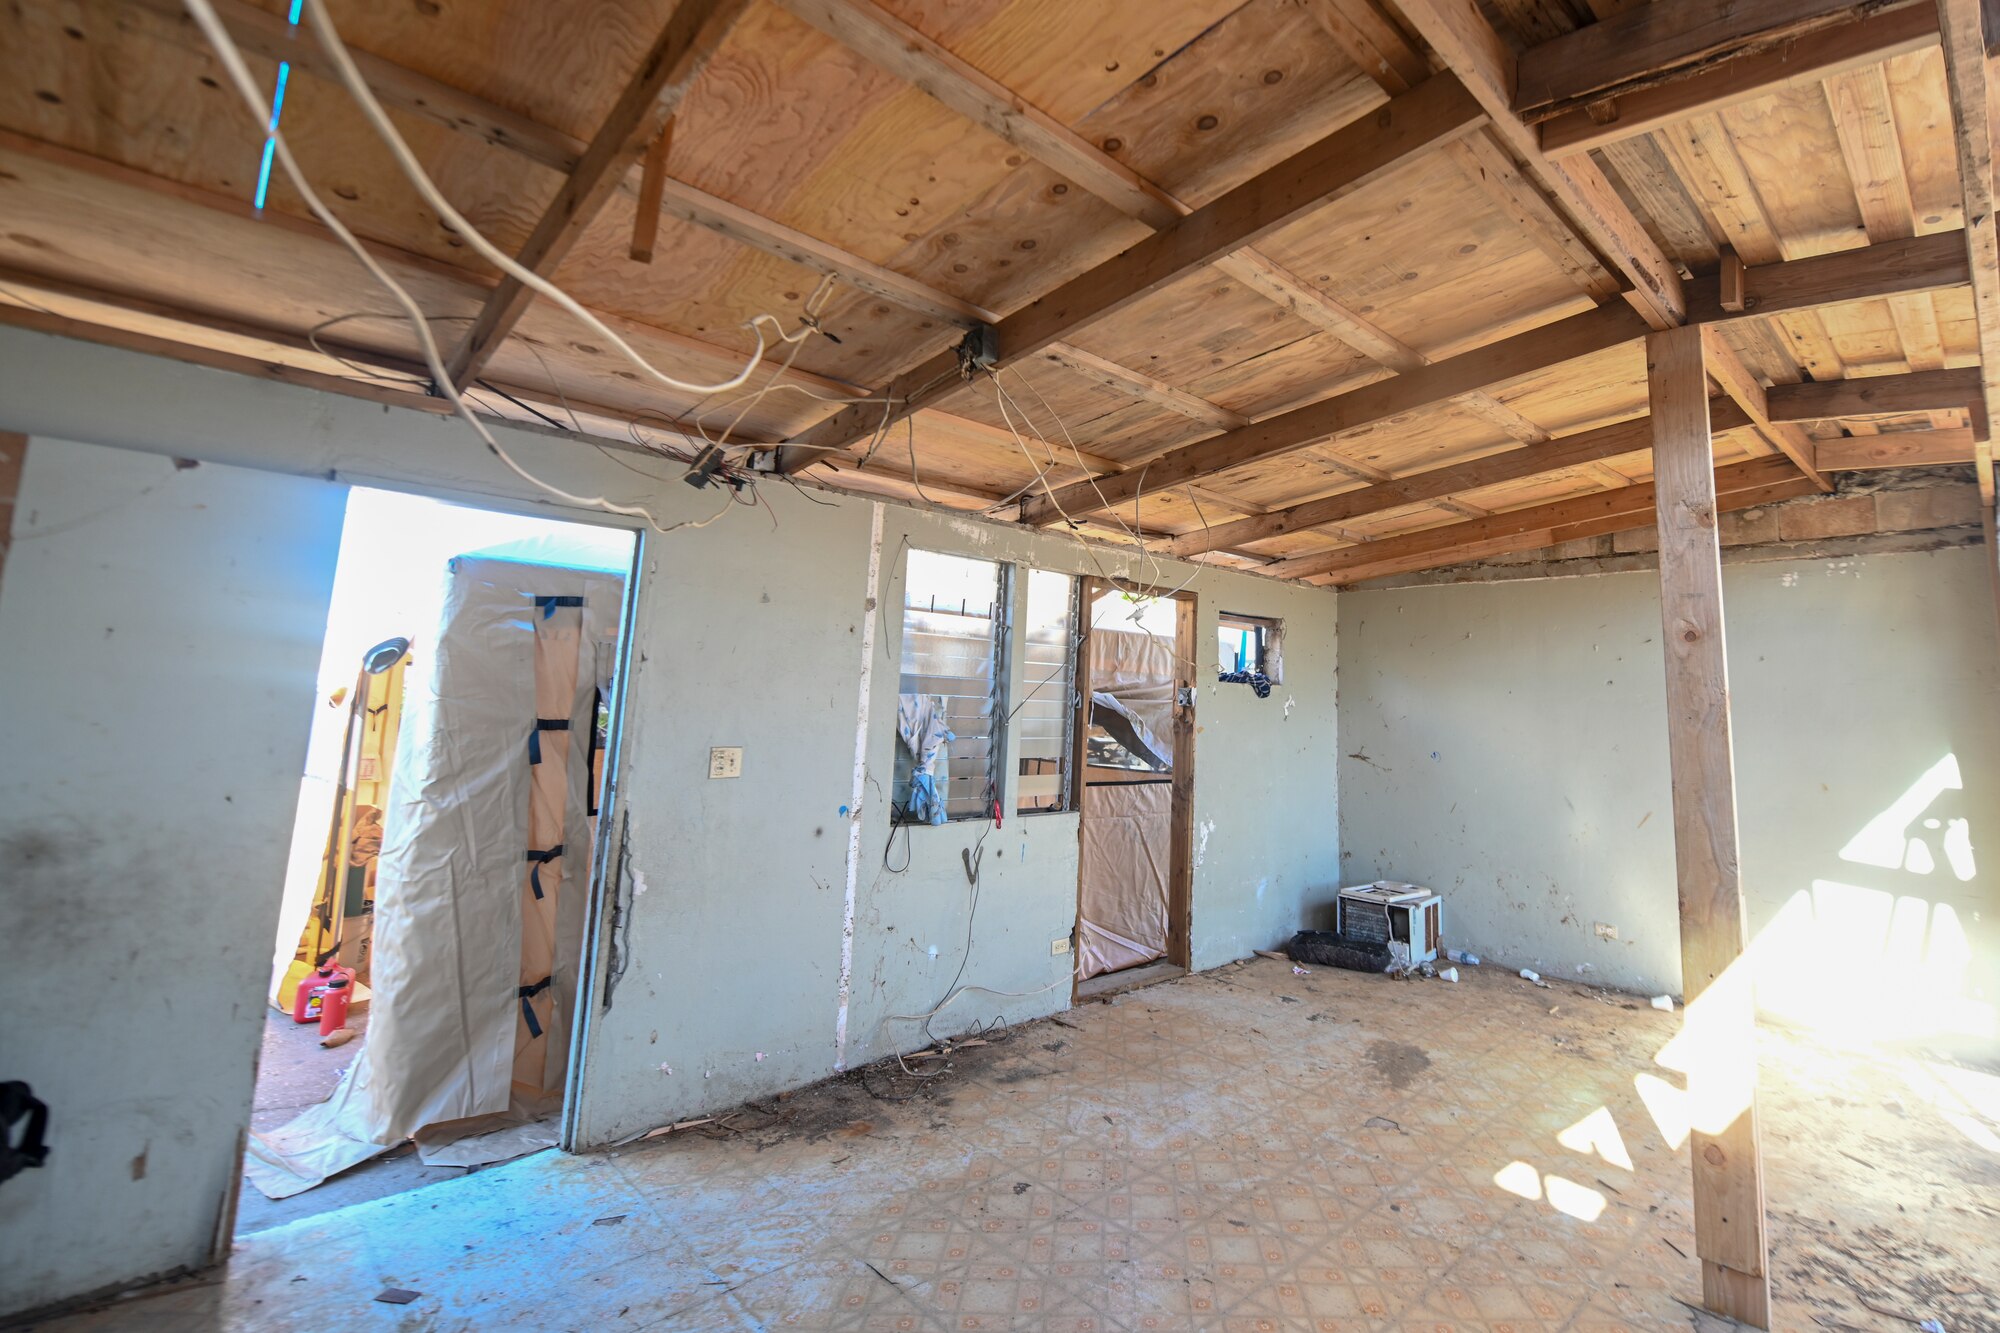 The interior view of a newly installed temporary roof of a home in the village of Koblerville, Saipan, Commonwealth of Northern Mariana Islands, Nov. 20, 2018.